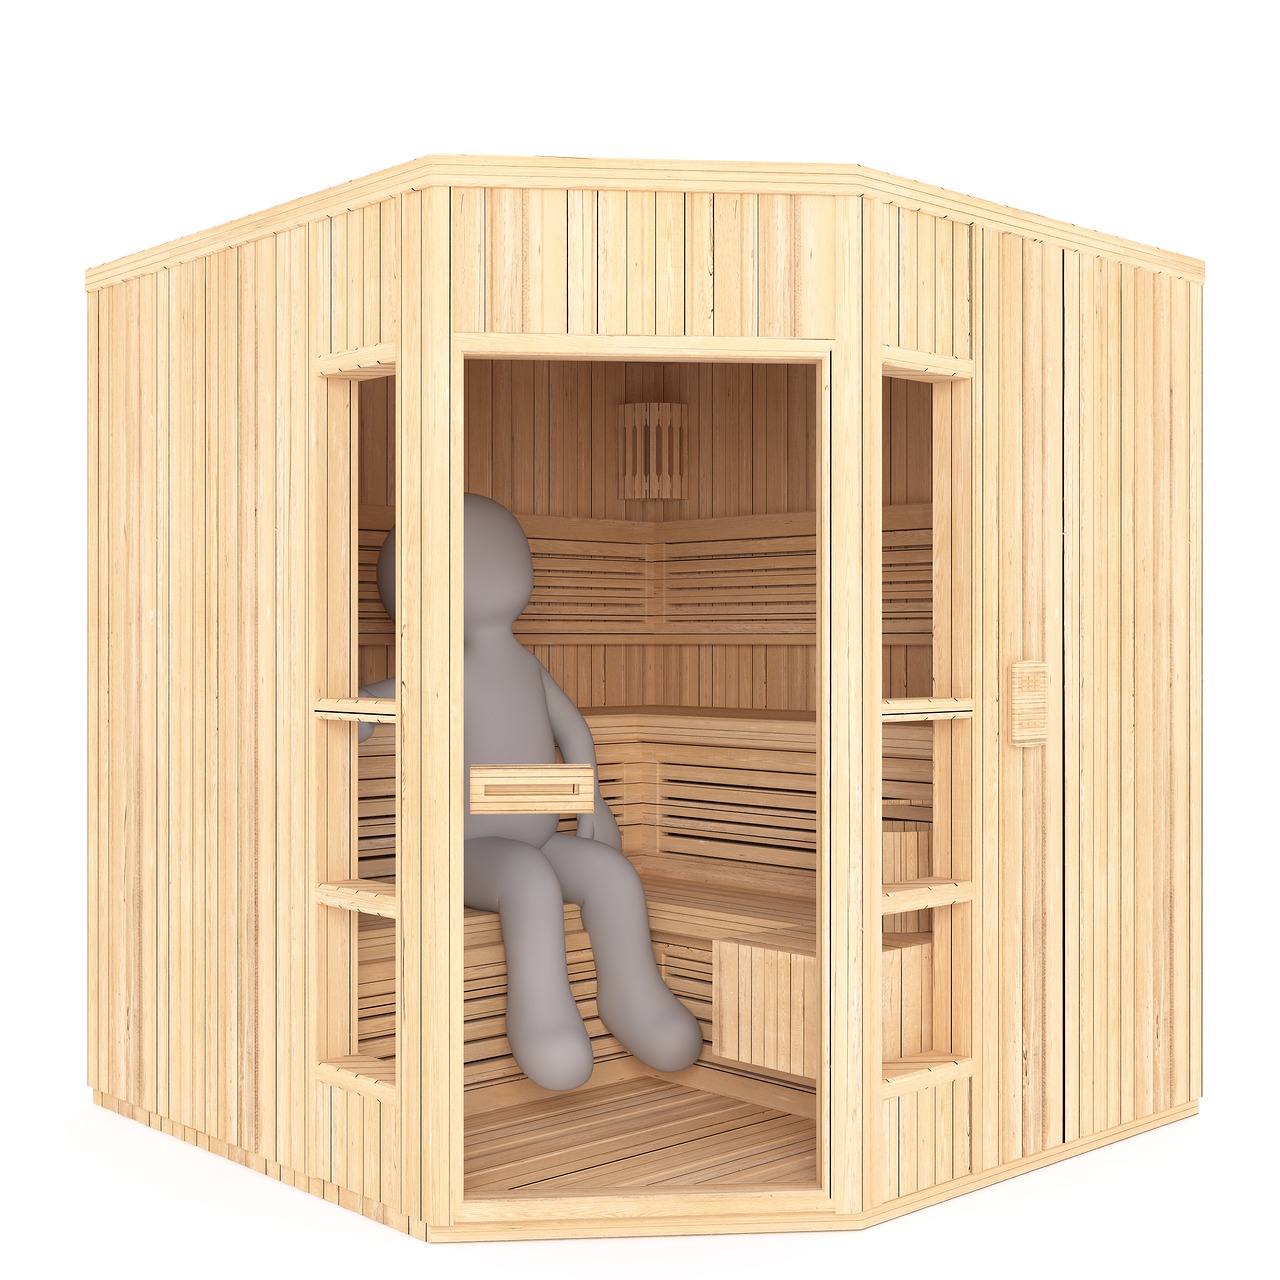 Why Try an Infrared Sauna In New York City?